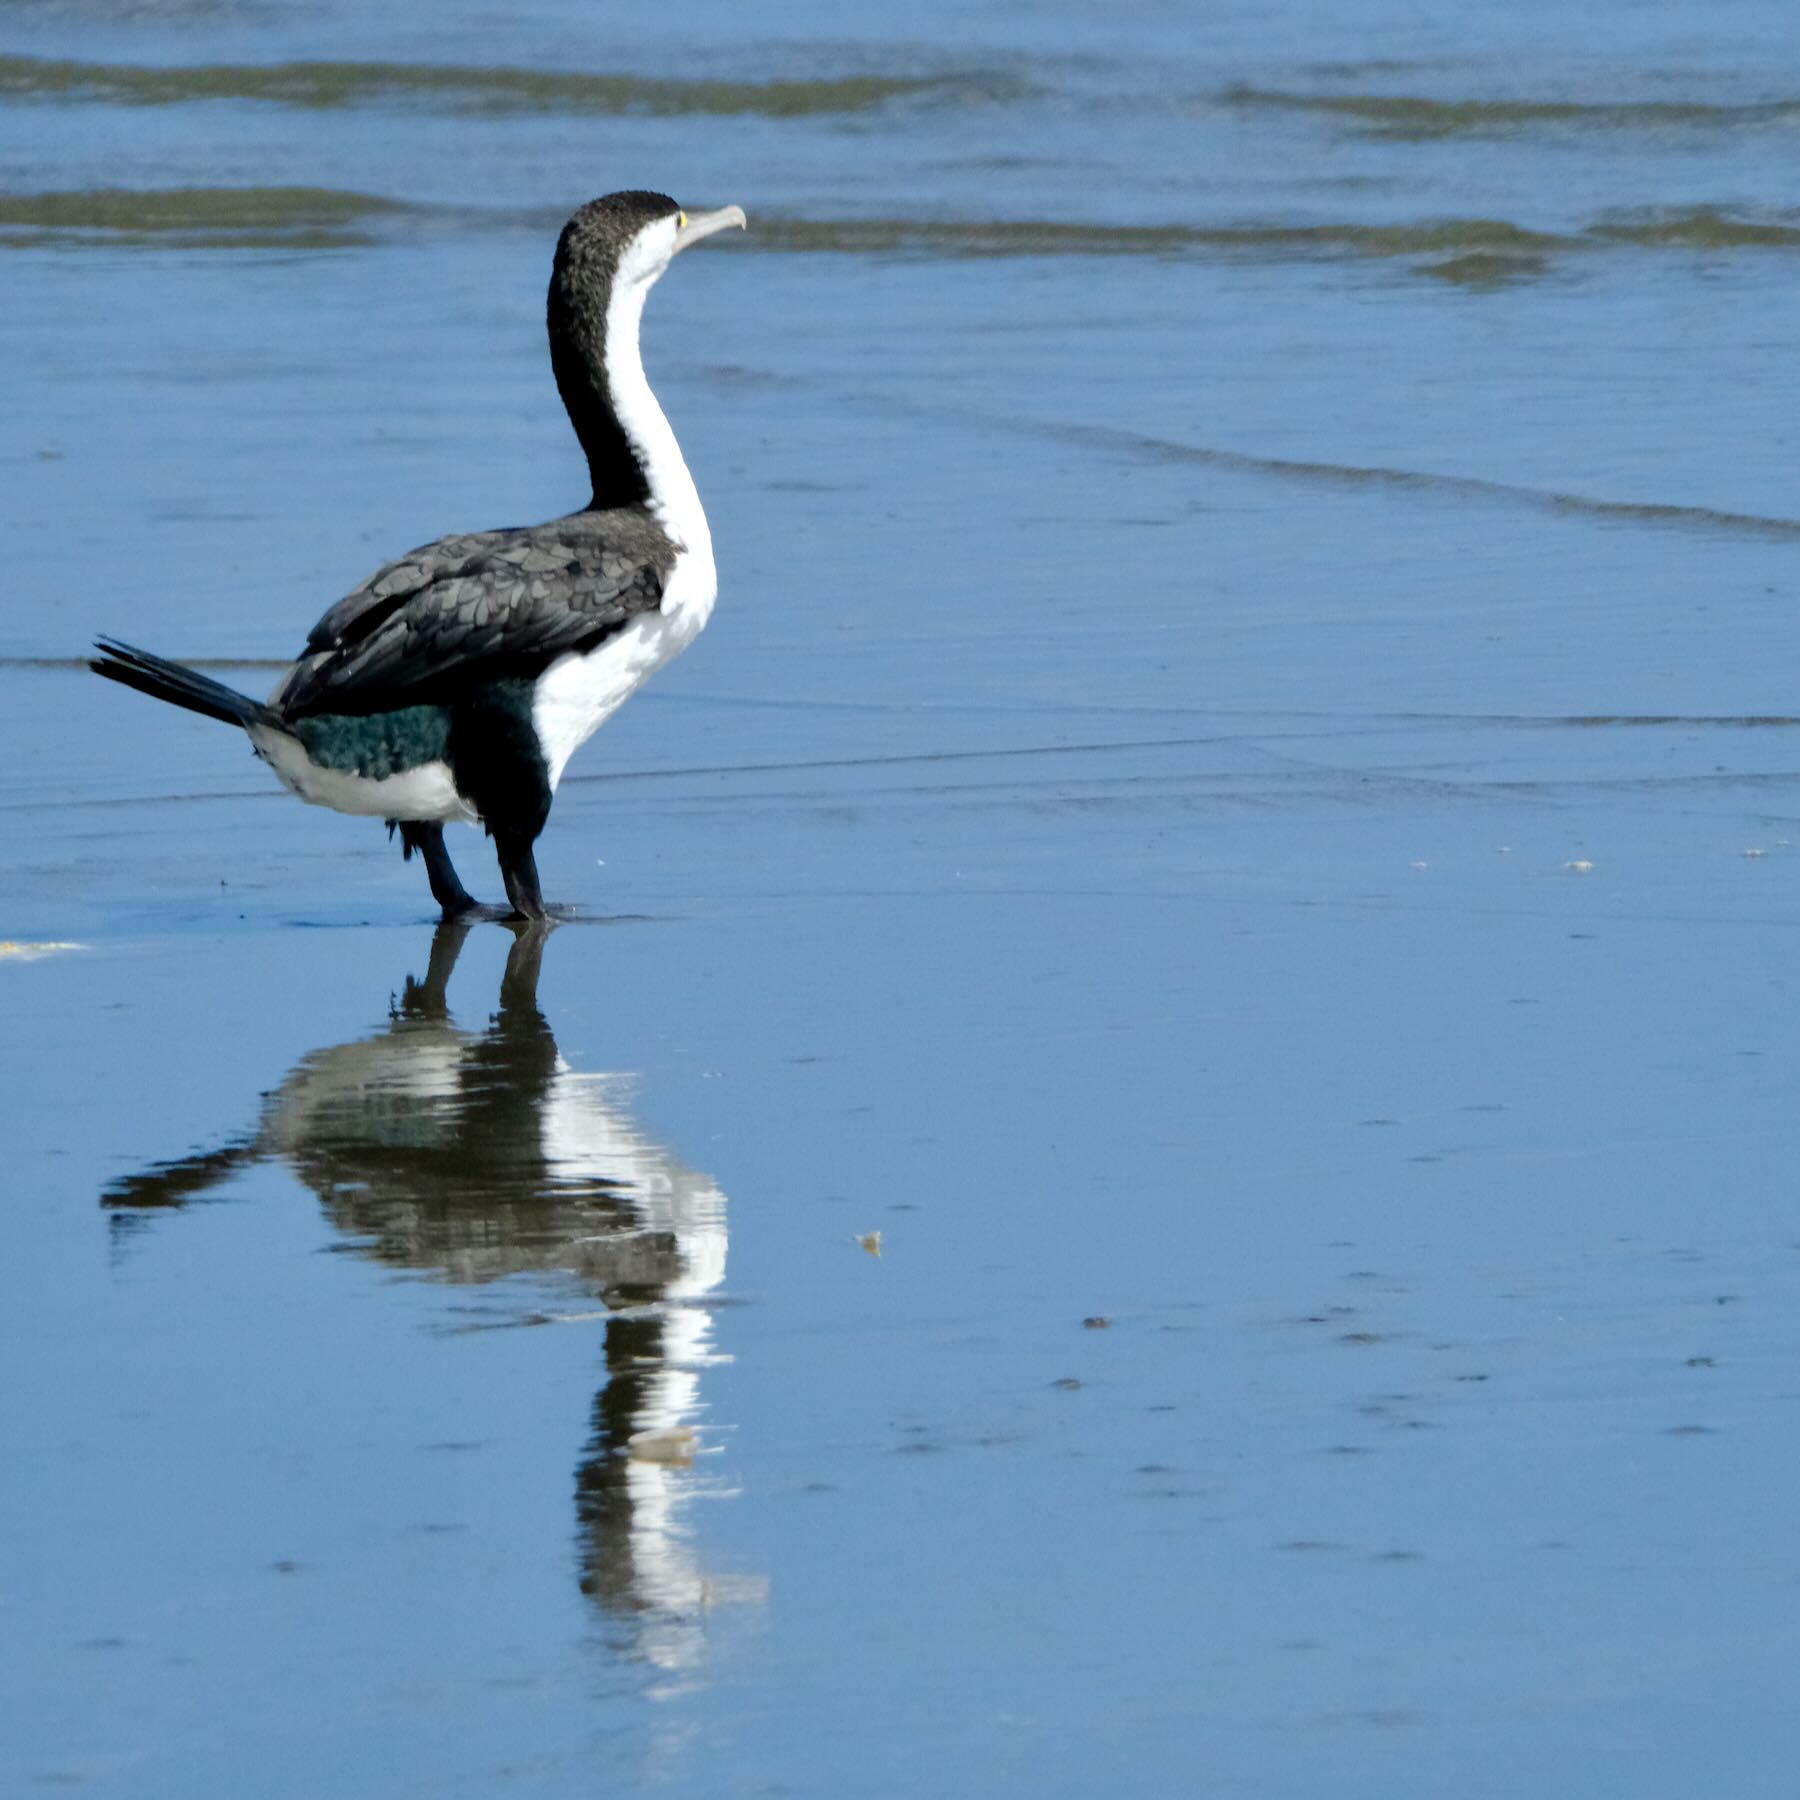 Large black and white bird with wings folded, reflected in wet sand. 